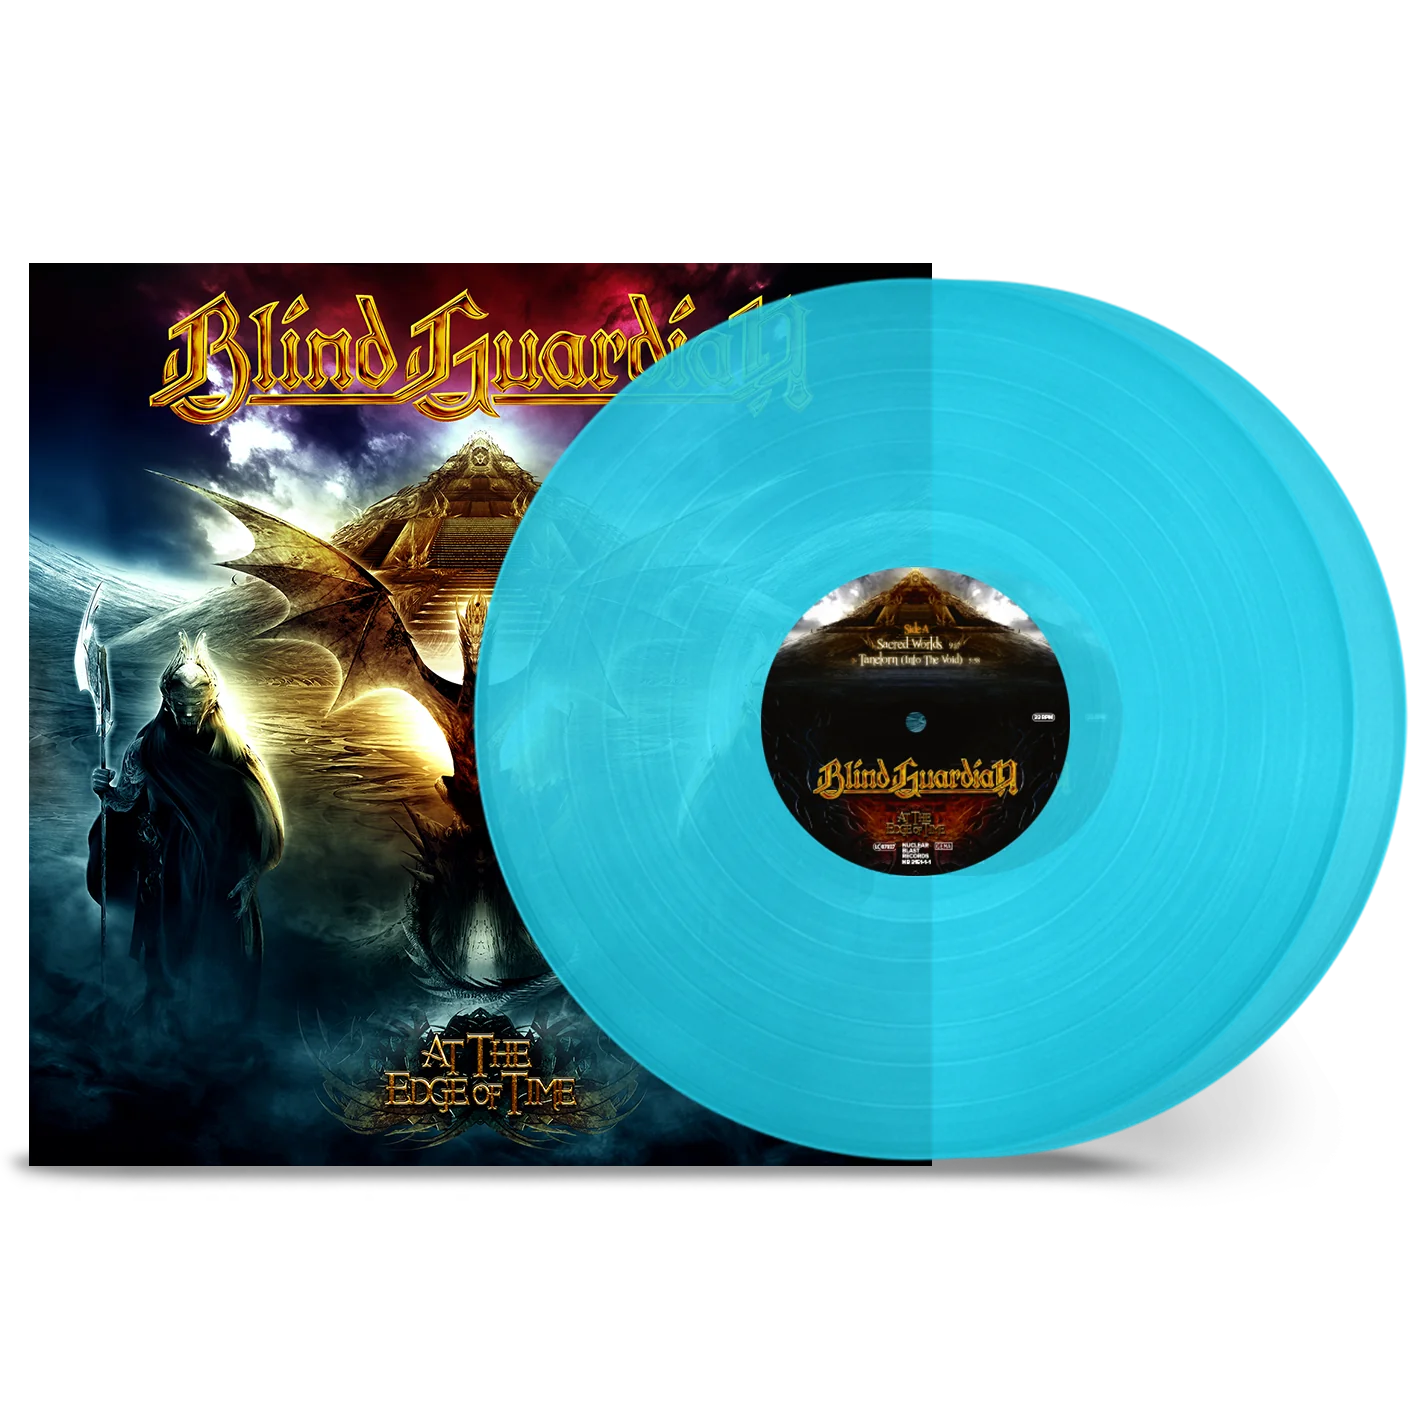 Blind Guardian - At the Edge of Time double LP